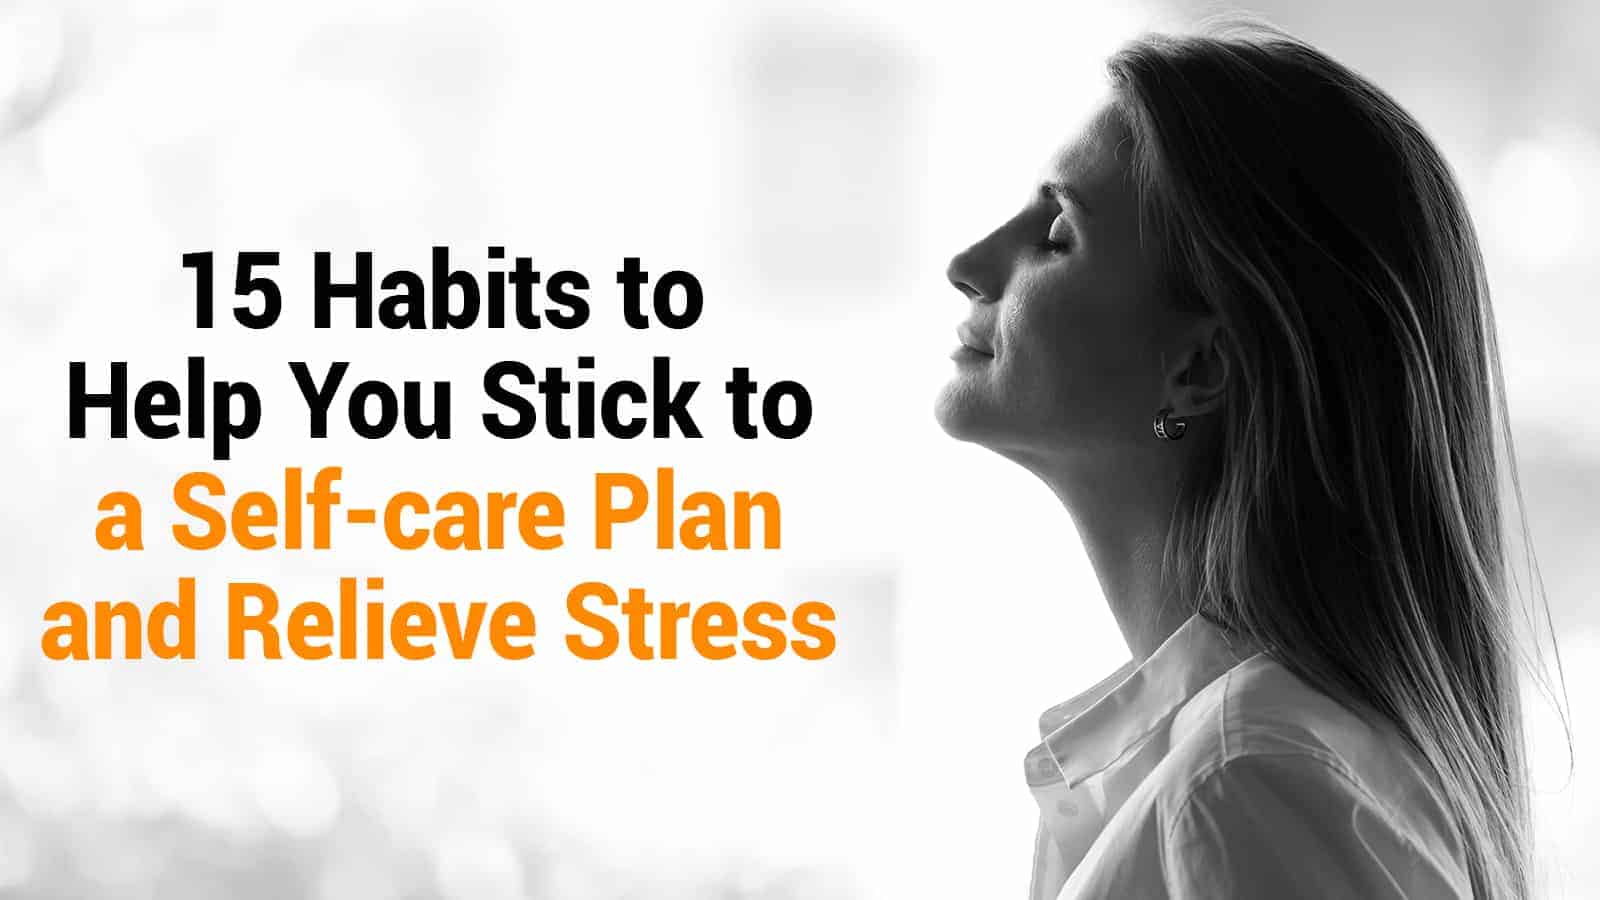 15 Habits to Help You Stick to a Self-care Plan and Relieve Stress